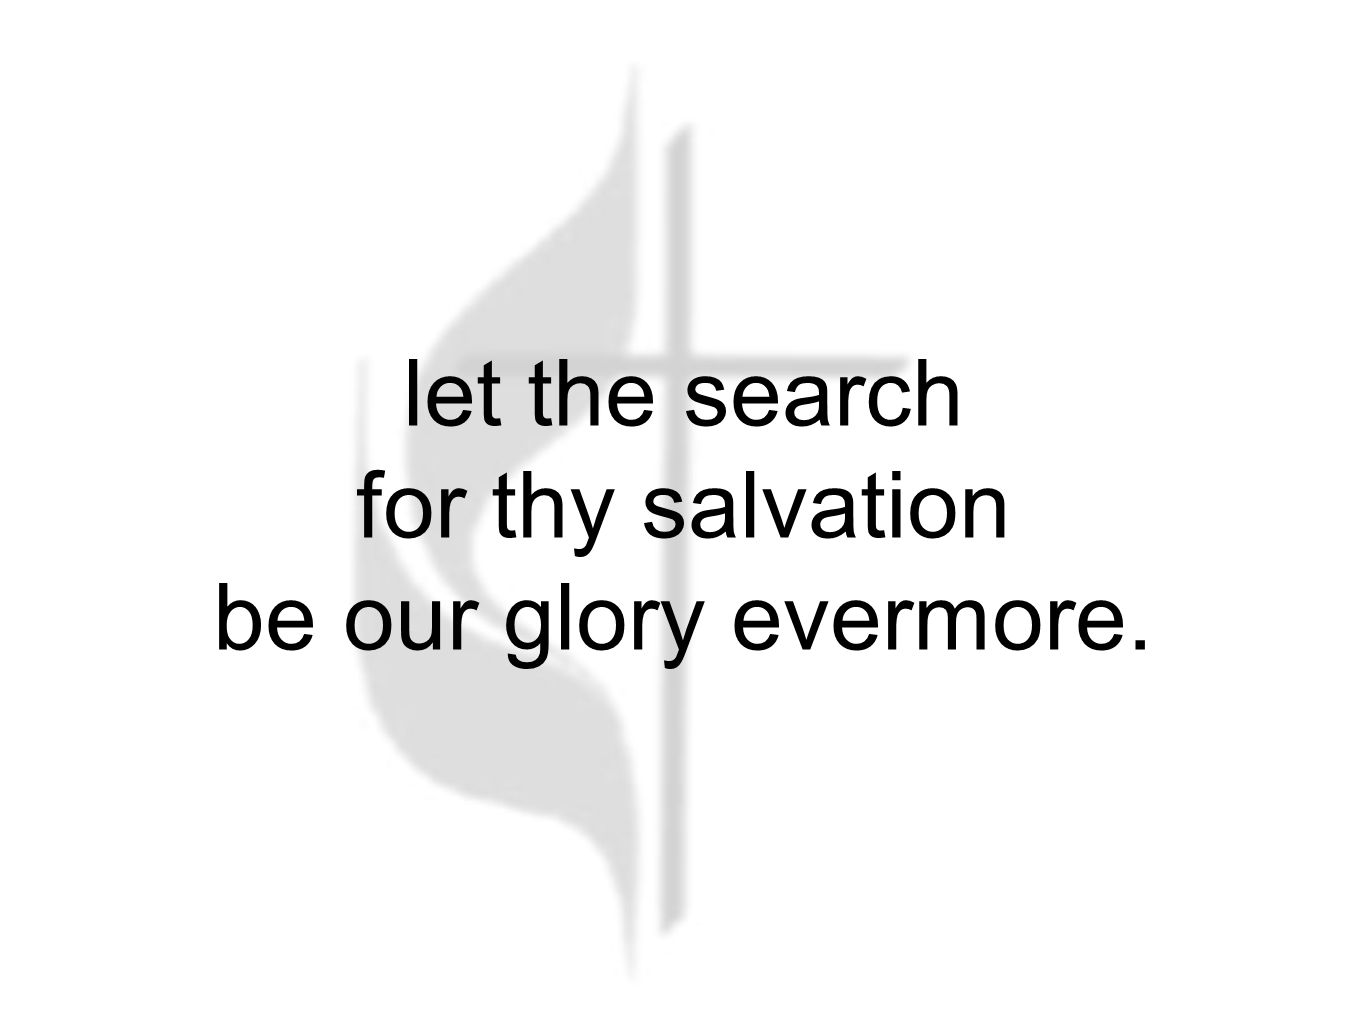 let the search for thy salvation be our glory evermore.